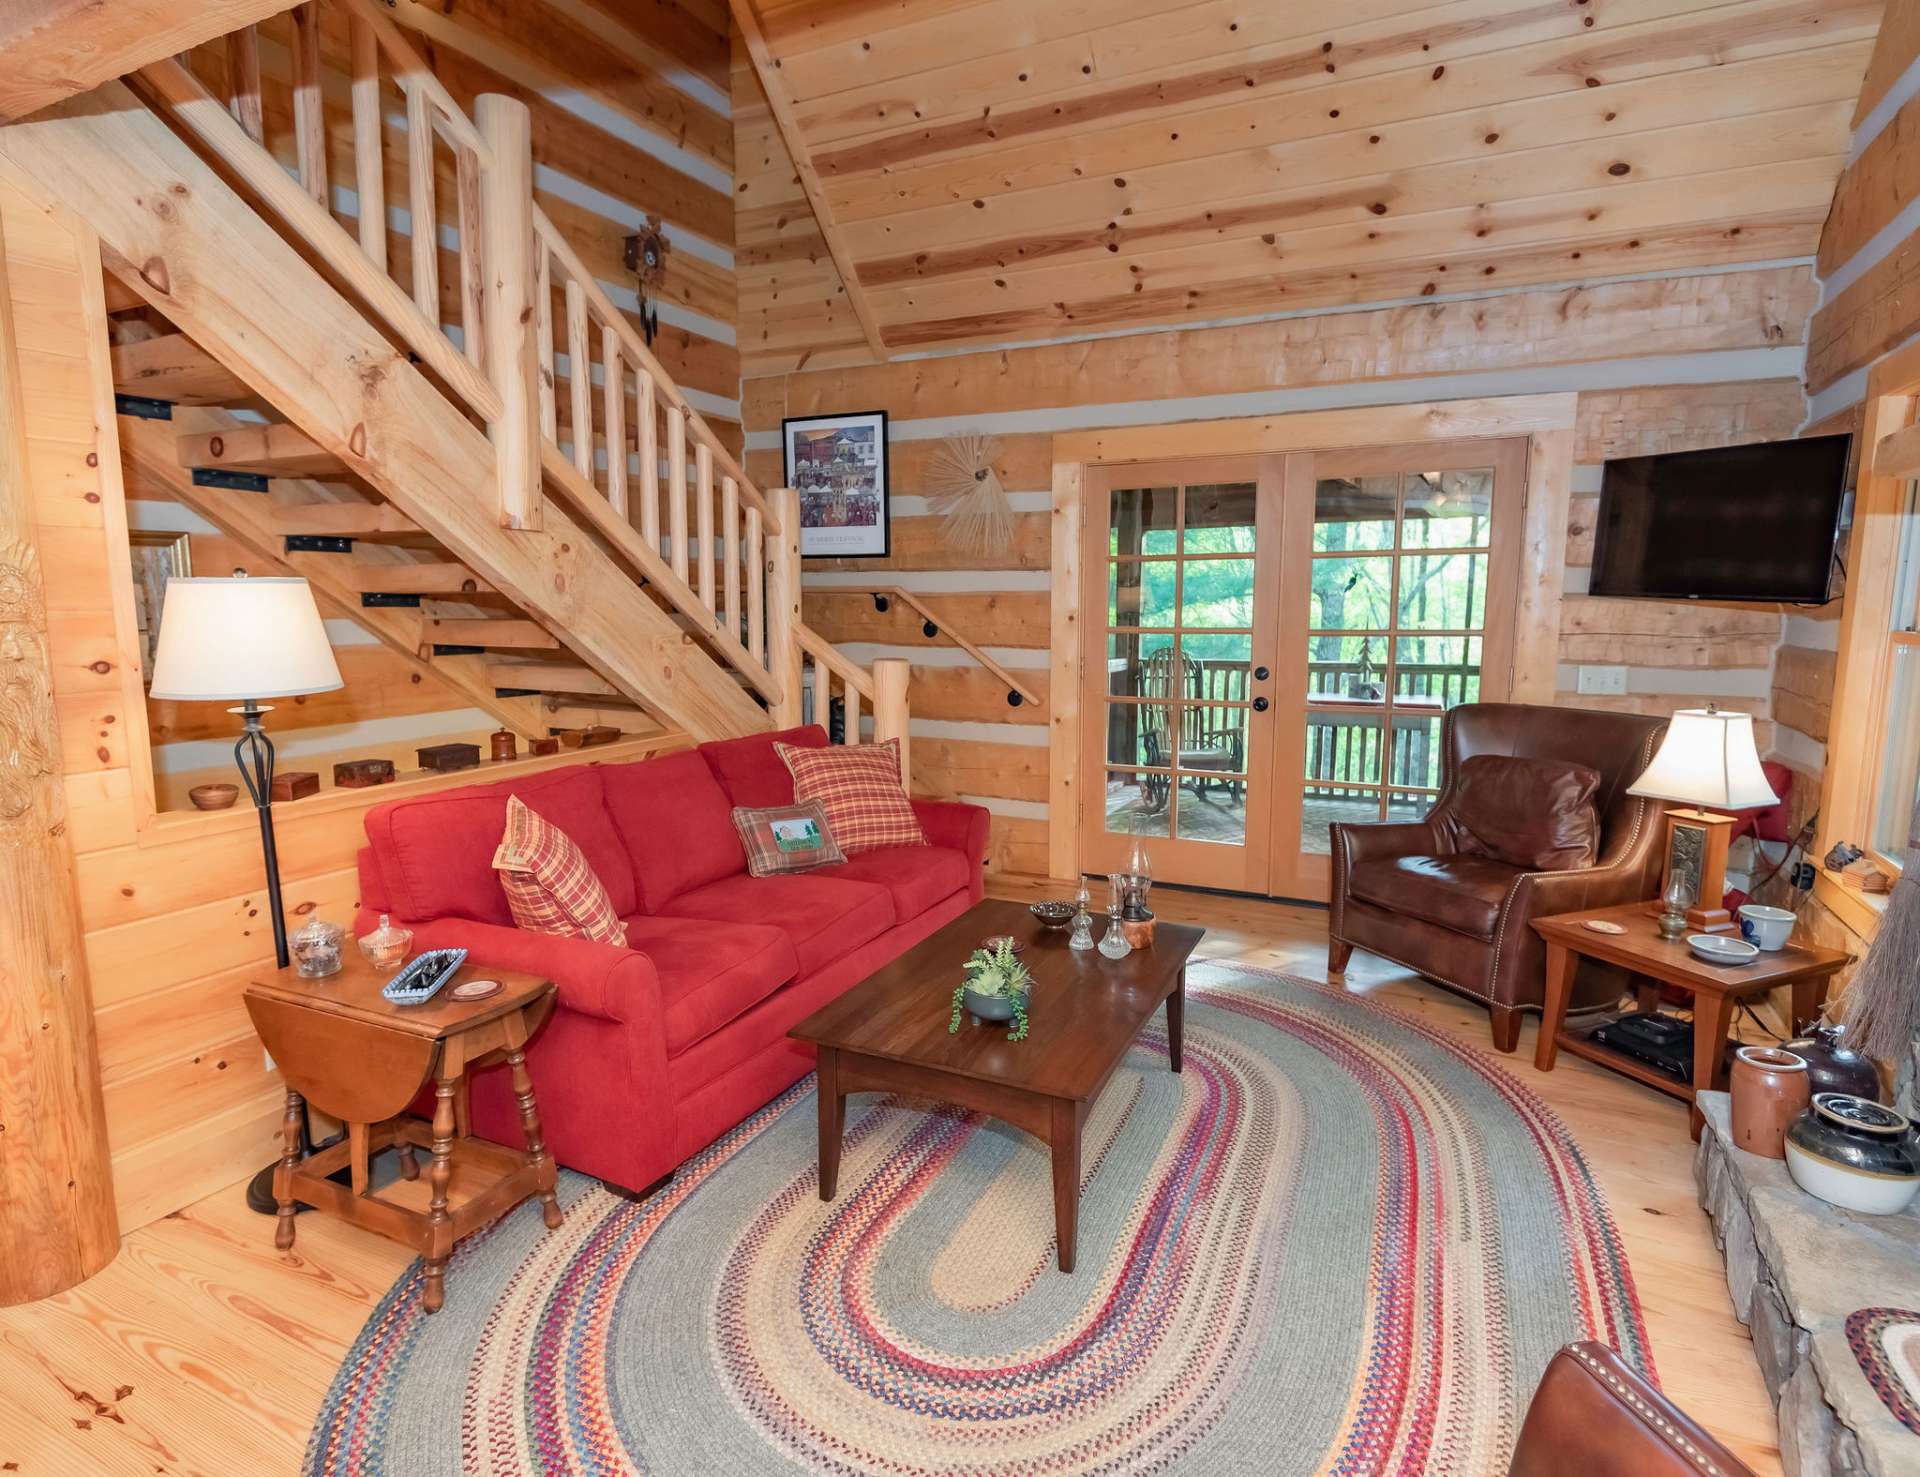 A vaulted great room is filled with natural light and features wood floors and a fireplace with gas logs.